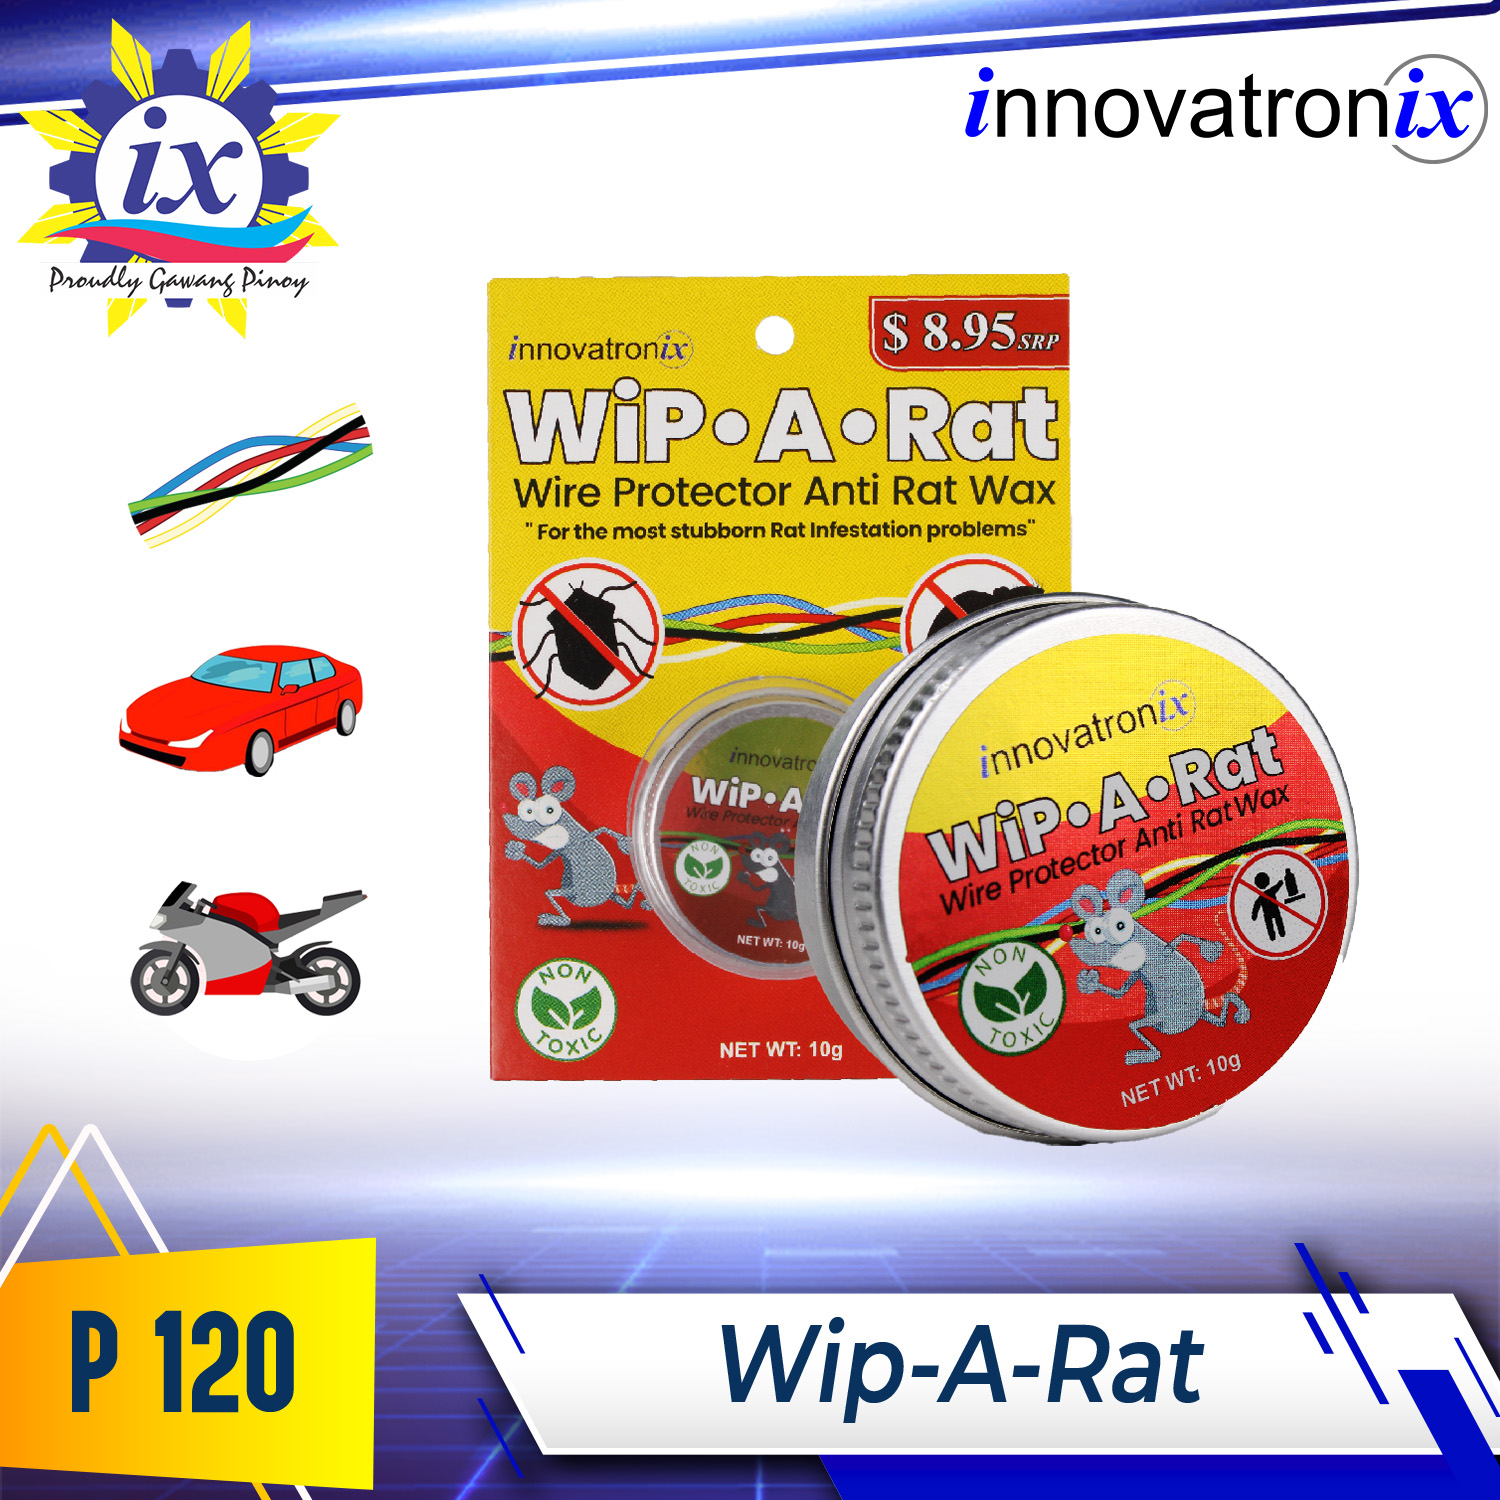 Wip A Rat 10g Dealer's Pack - 100 pieces (Wire Protector Anti Rat Wax) –  Innovatronix Shopify